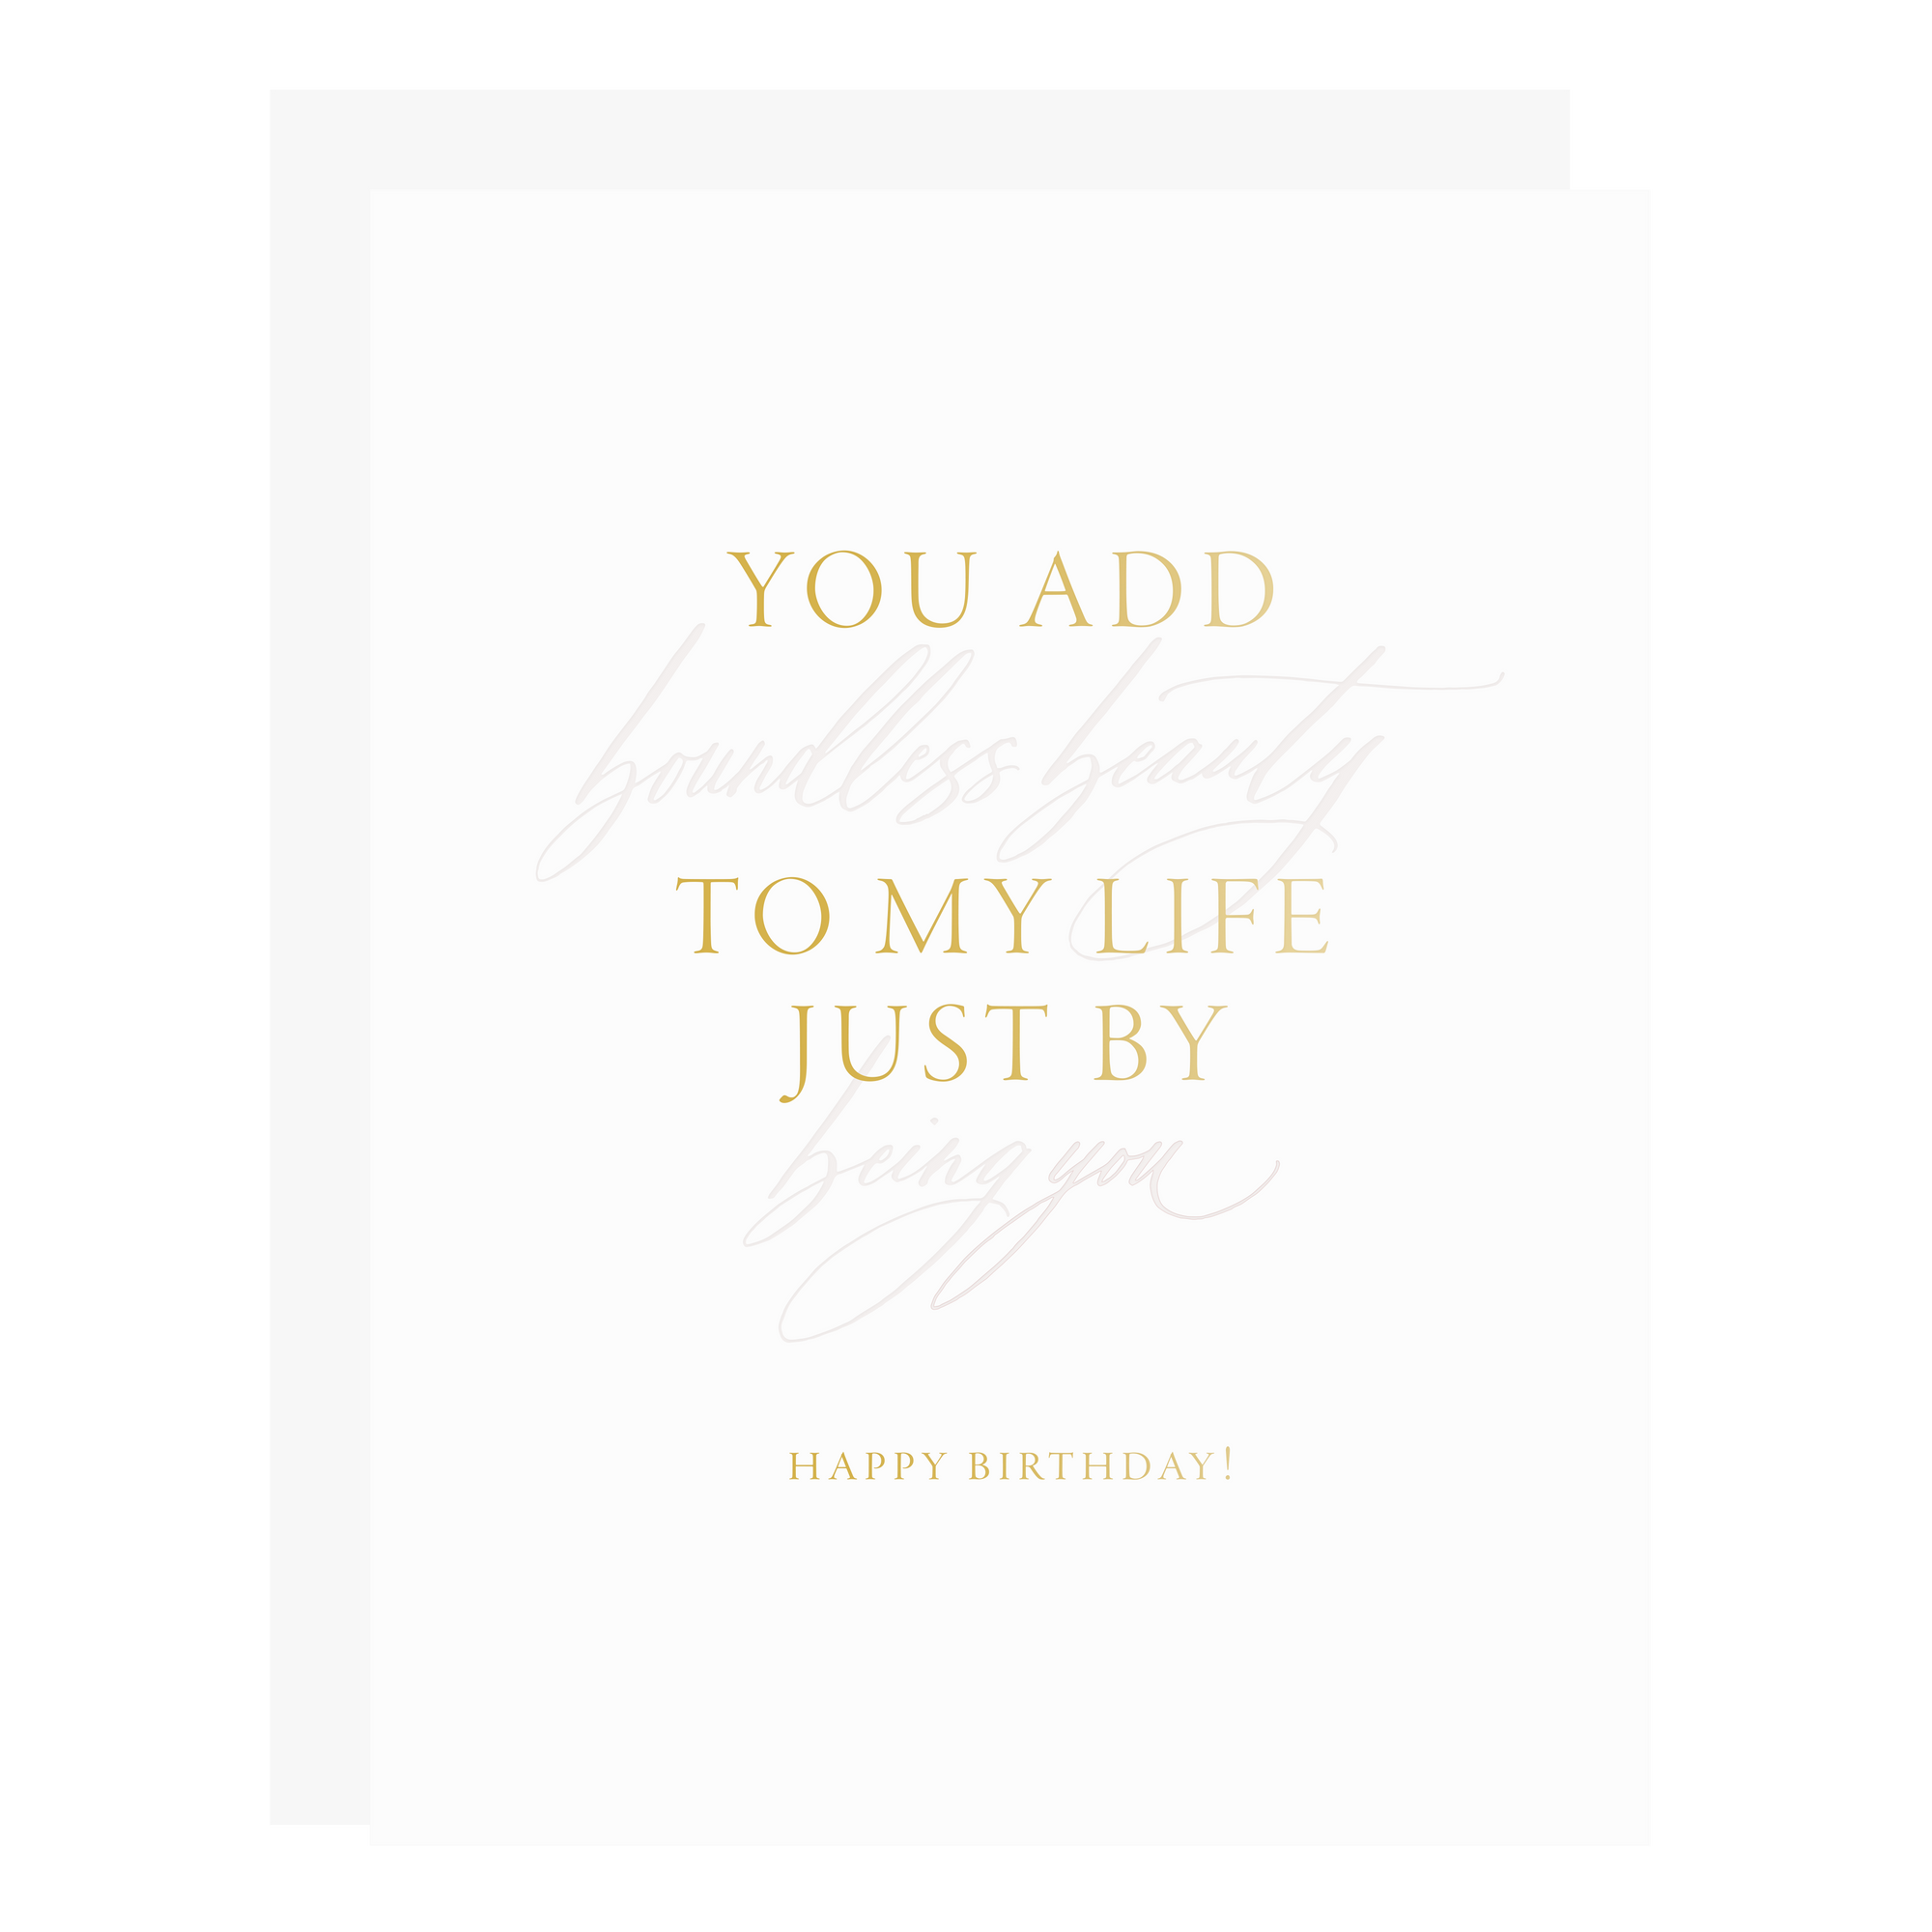 Our "Boundless Beauty" card, letterpress printed by hand in pale blush ink and gold foil.